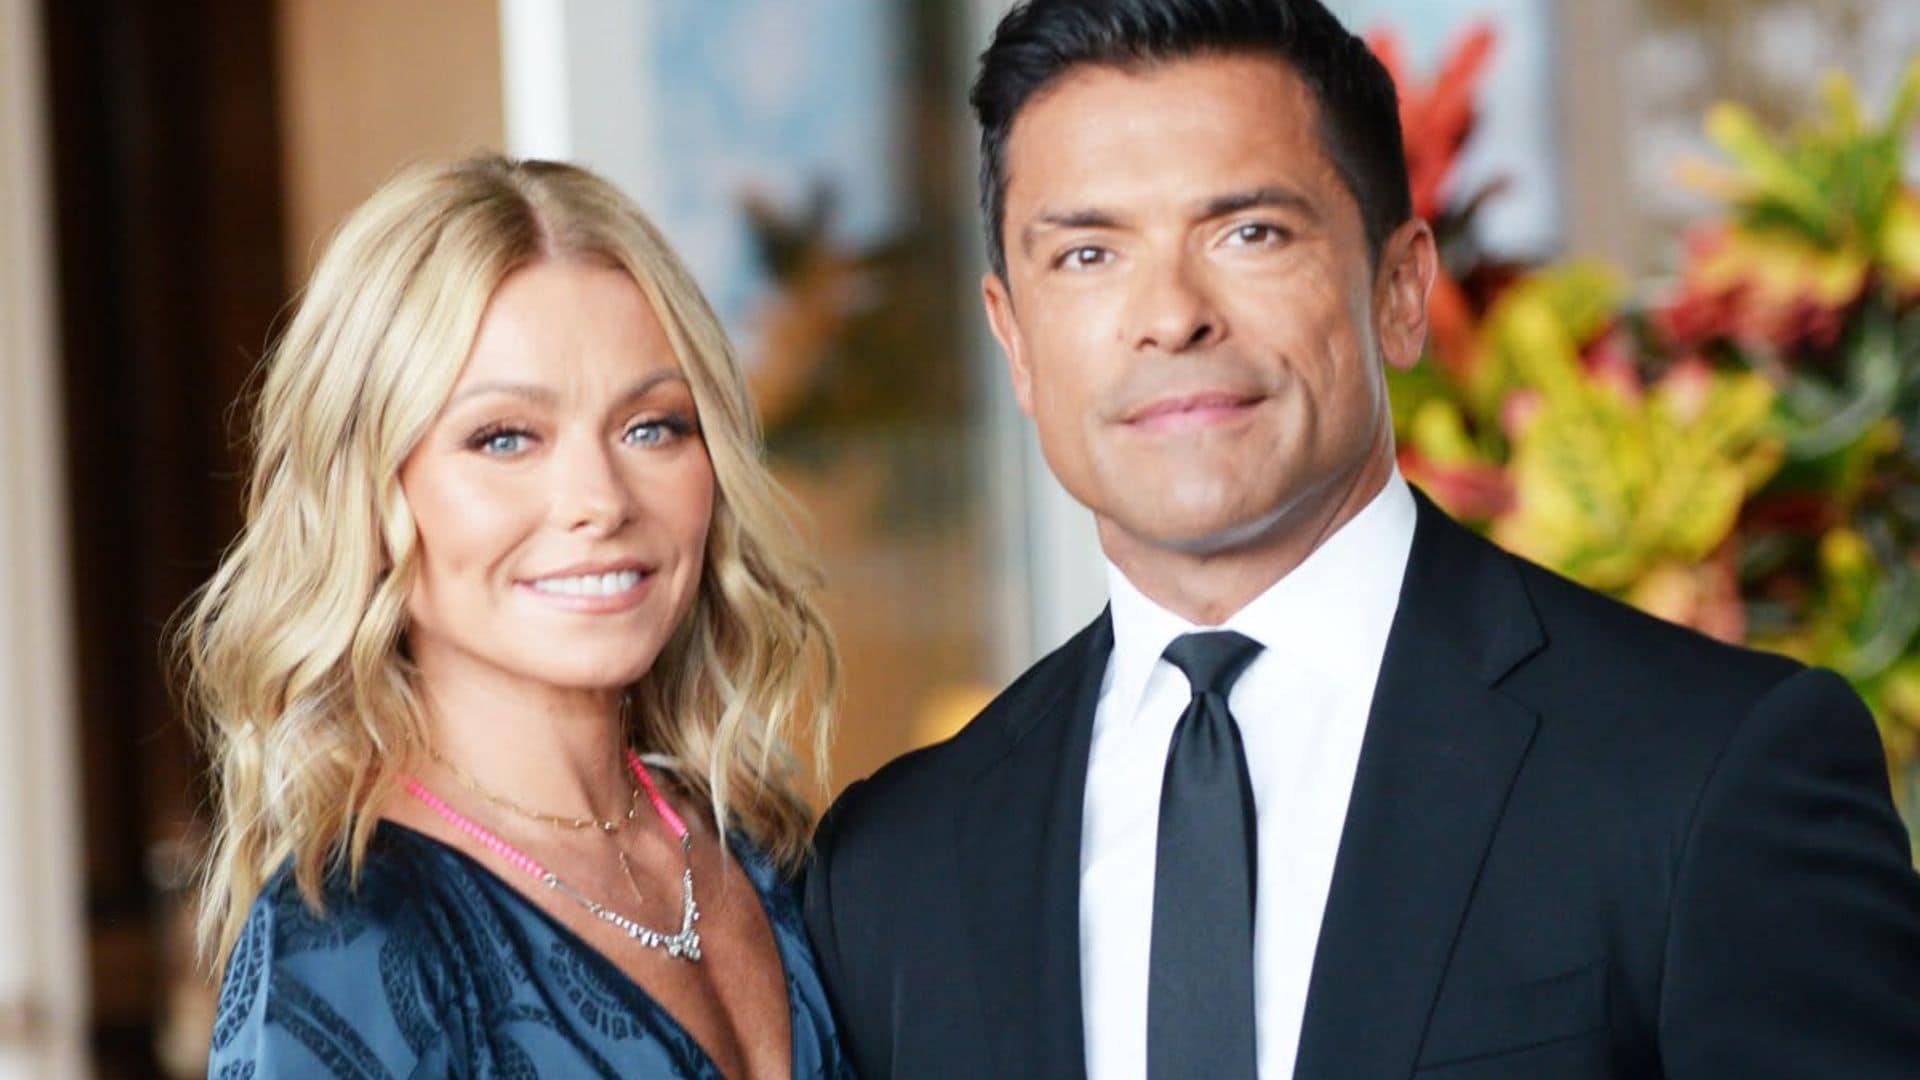 Kelly Ripa celebrates Mark Consuelos' 50th birthday: 'I've loved you for more than half of your life'